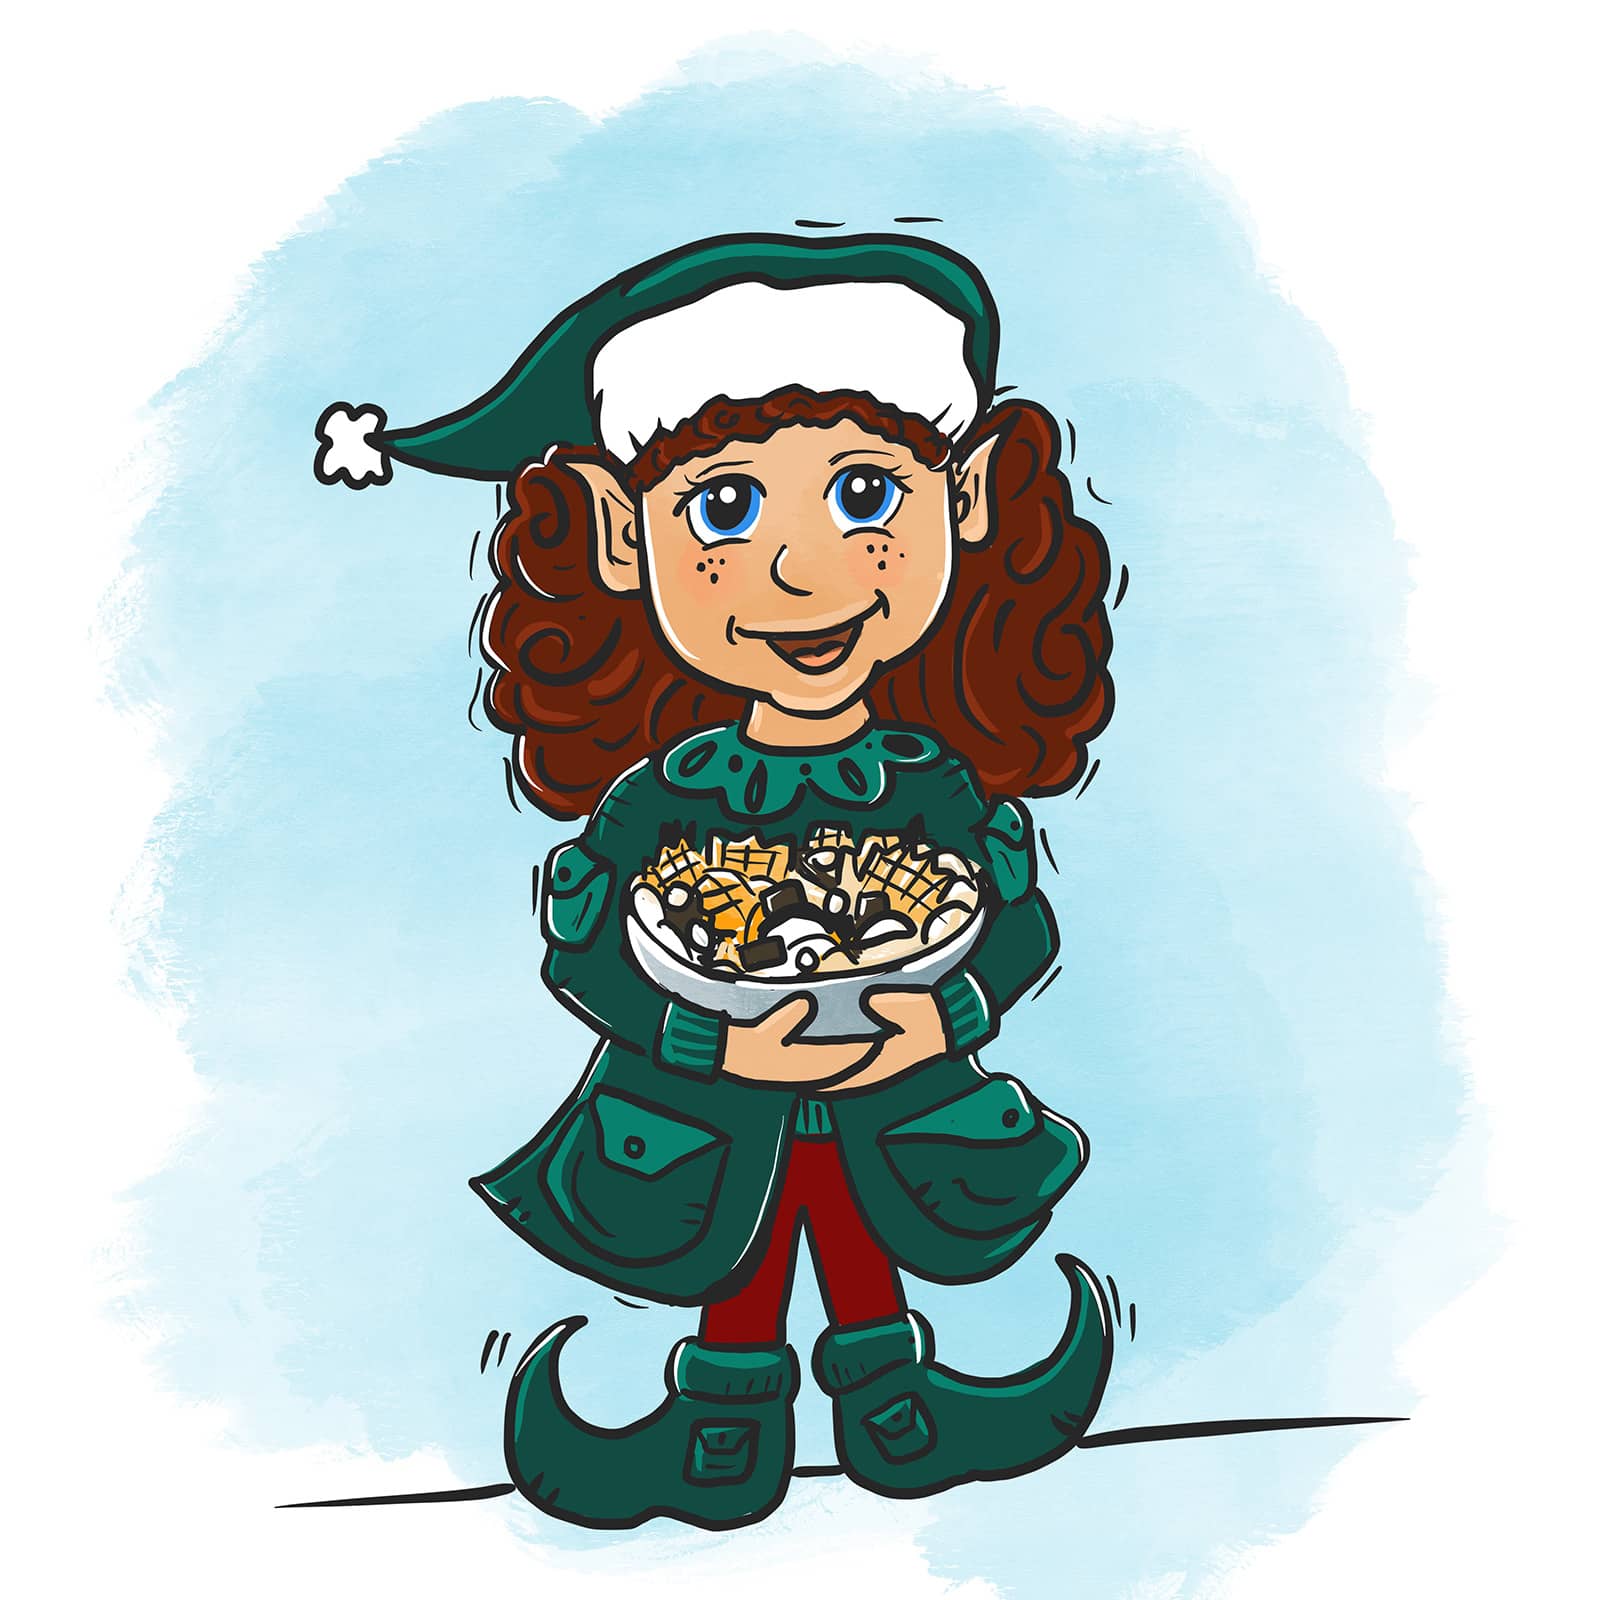 Pixie the elf is eating Fries and Oreo™ Cookie Skillet featuring Conquest® Delivery+™ Clear Coat Lattice Cut Fries